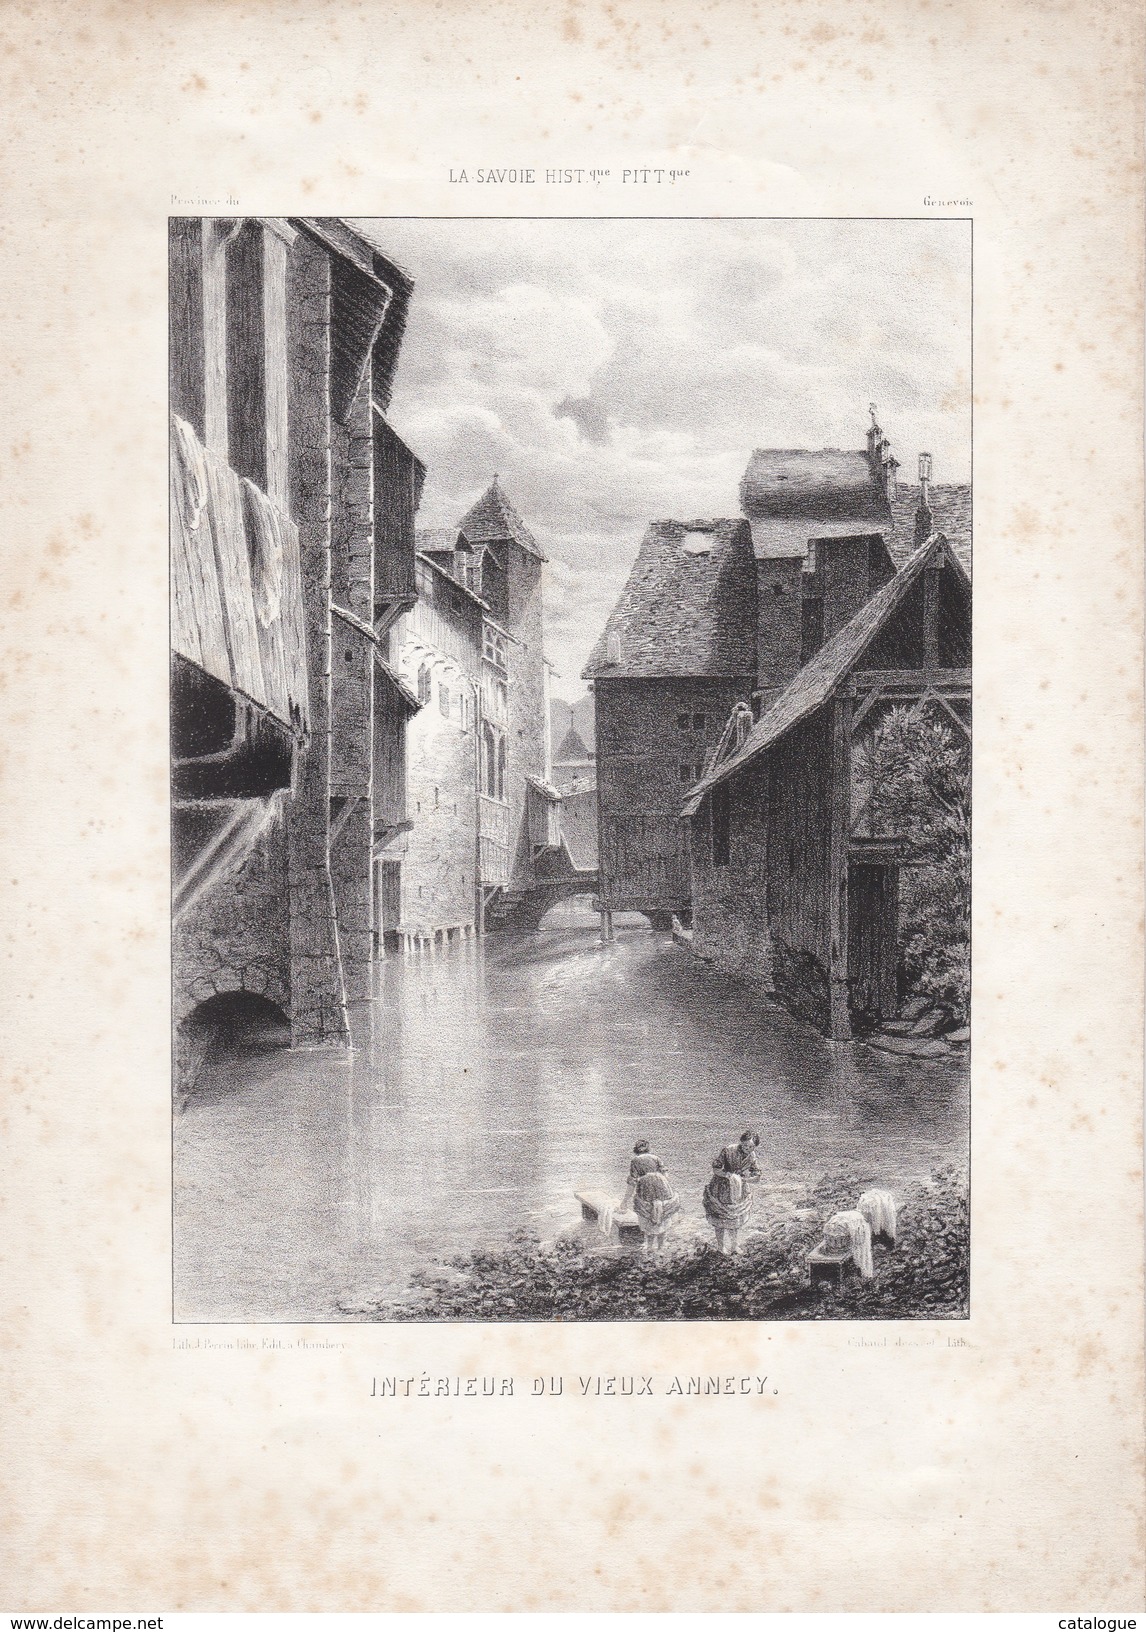 LITHOGRAPHIE - INTERIEUR DU VIEUX  ANNECY   - Lith J Perrin Libr. Edit. A  Chambery - Lithographies